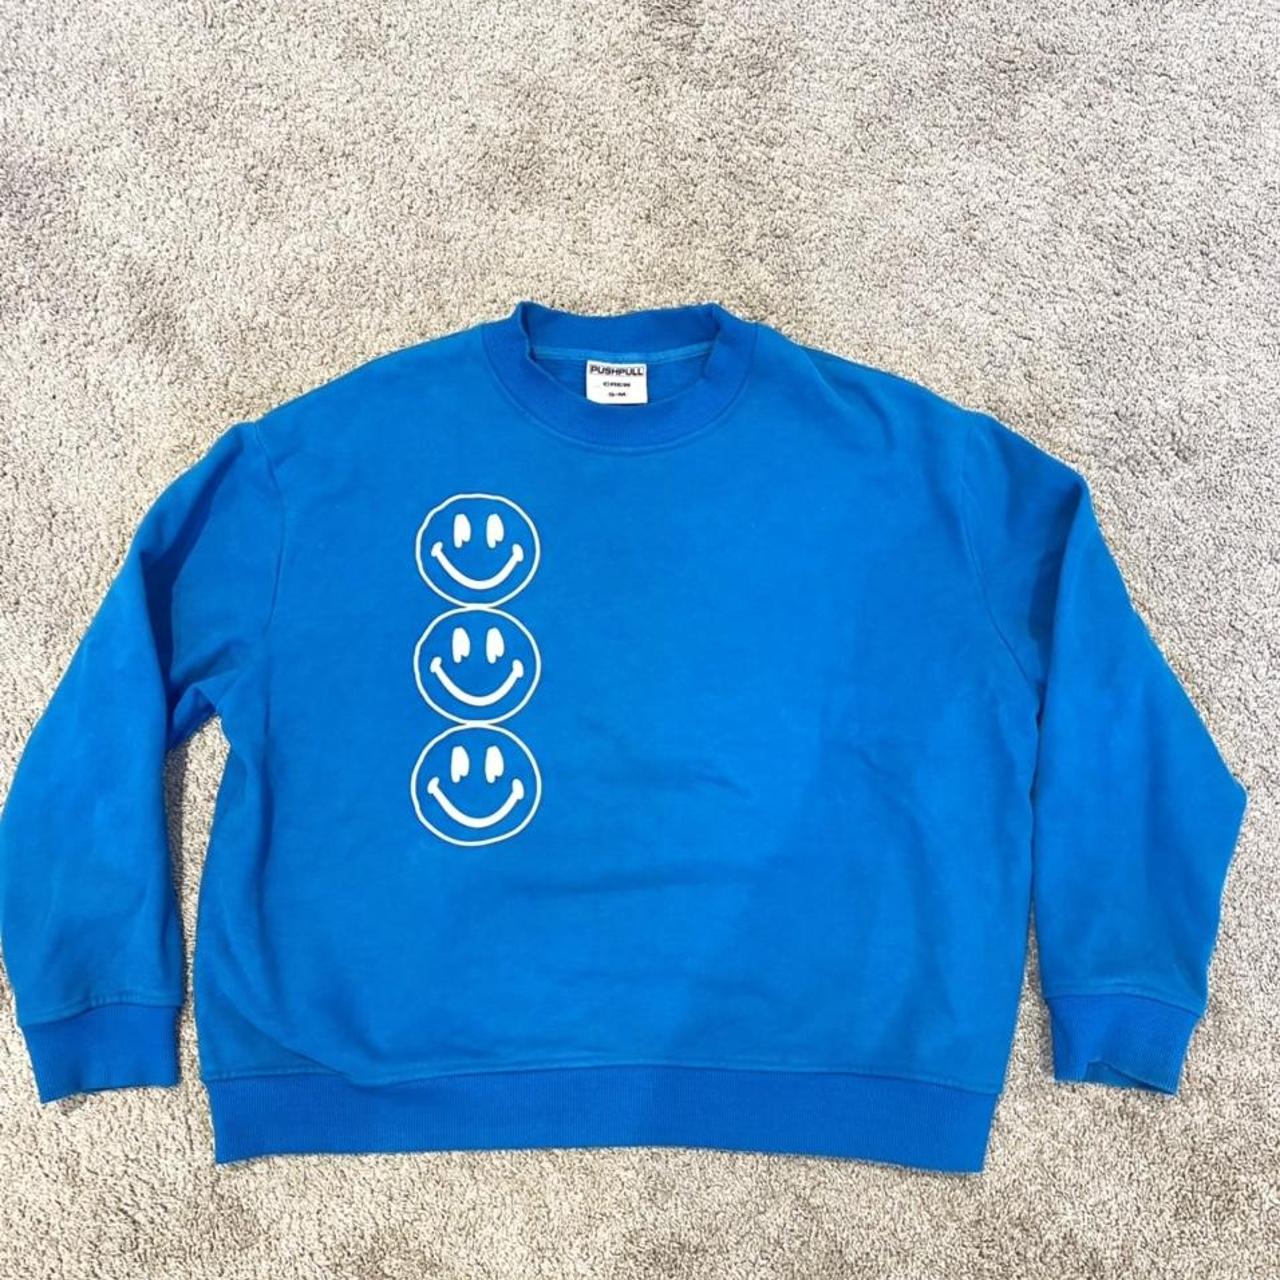 PUSH PULL CREW NECK. Size S-M (oversized fit). Was... - Depop